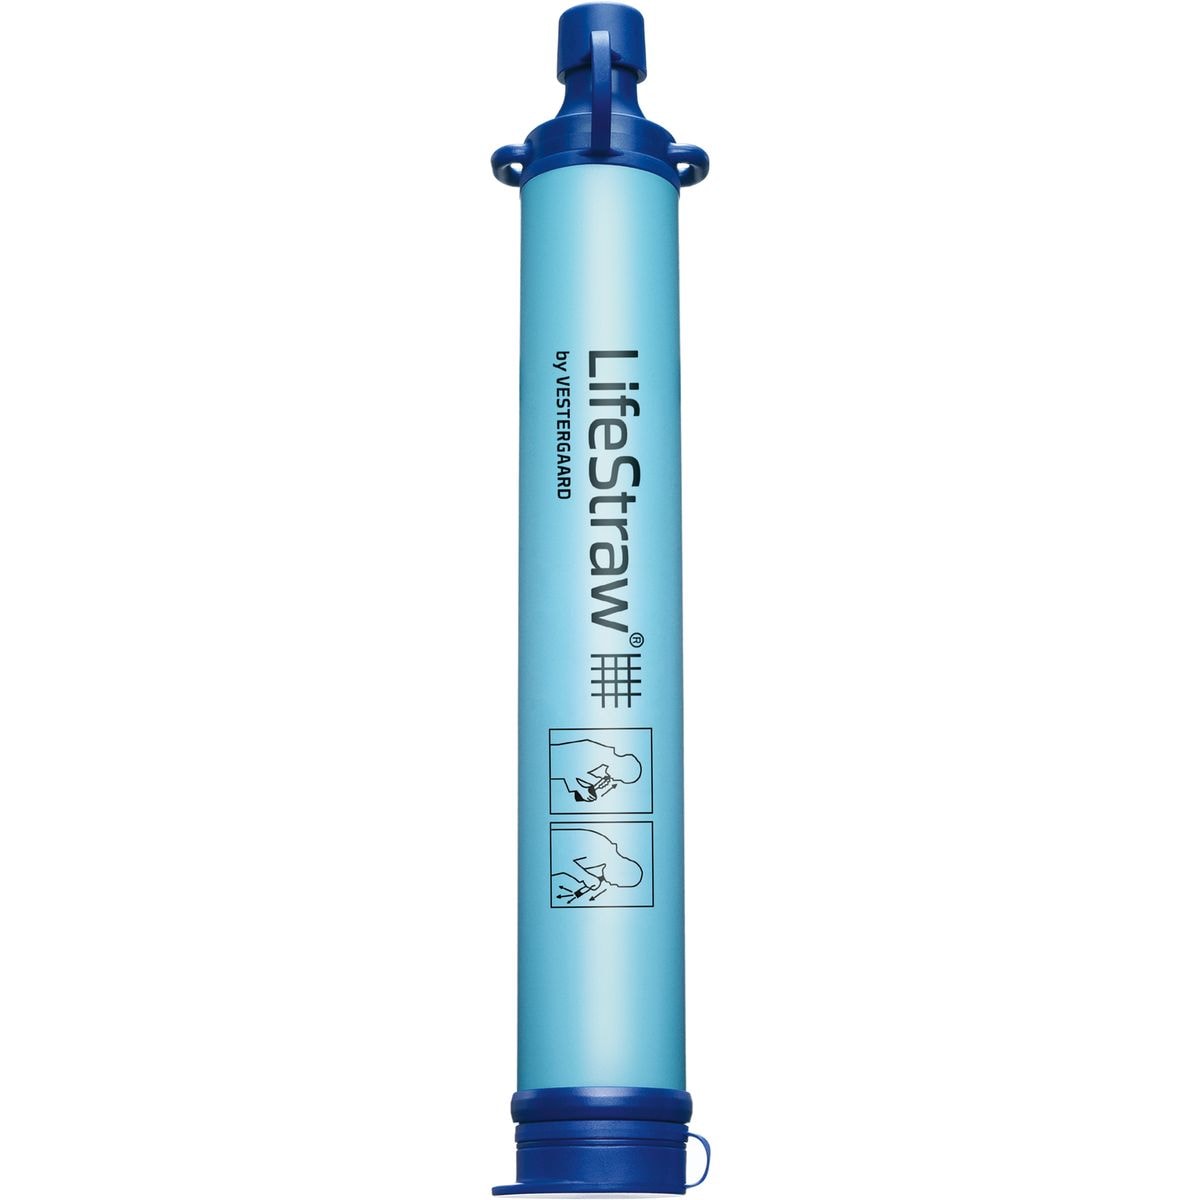 LifeStraw Go Series Stainless Steel Filter Bottle - 18oz Aegean Sea, One Size